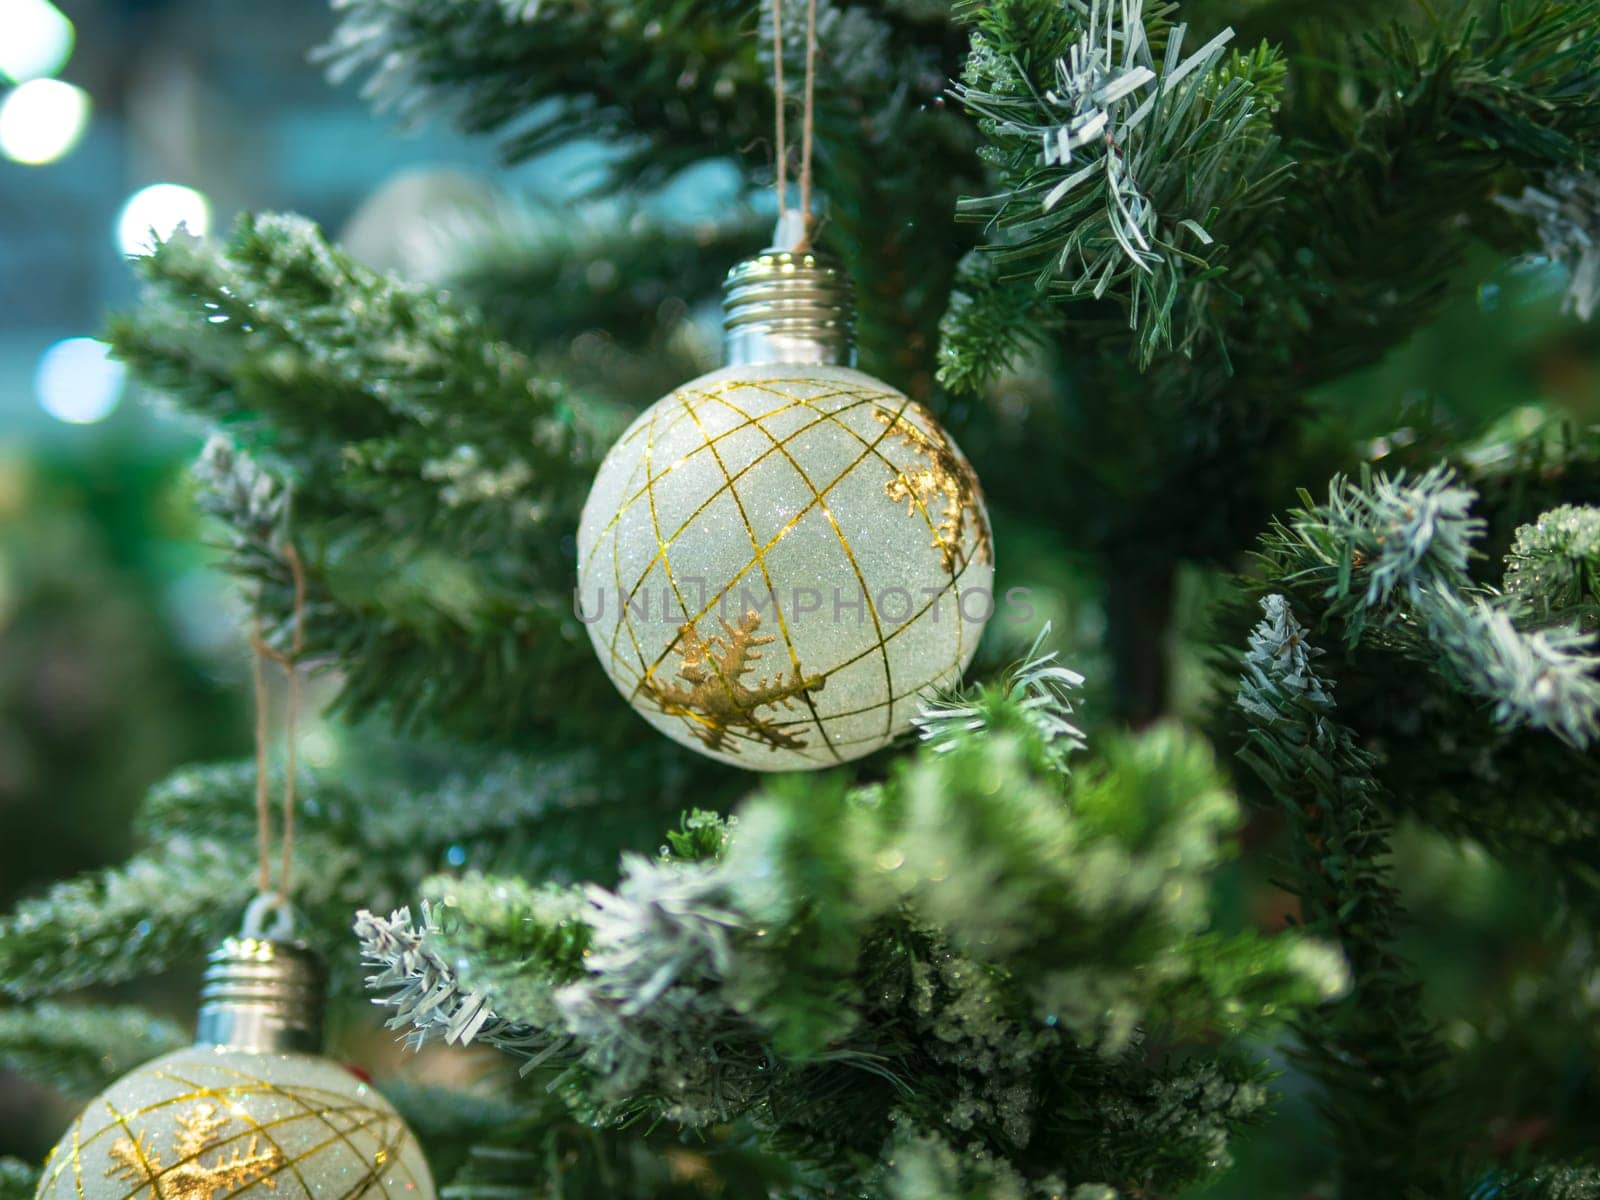 artificial christmas tree with white and golden ball ornament. defocused background